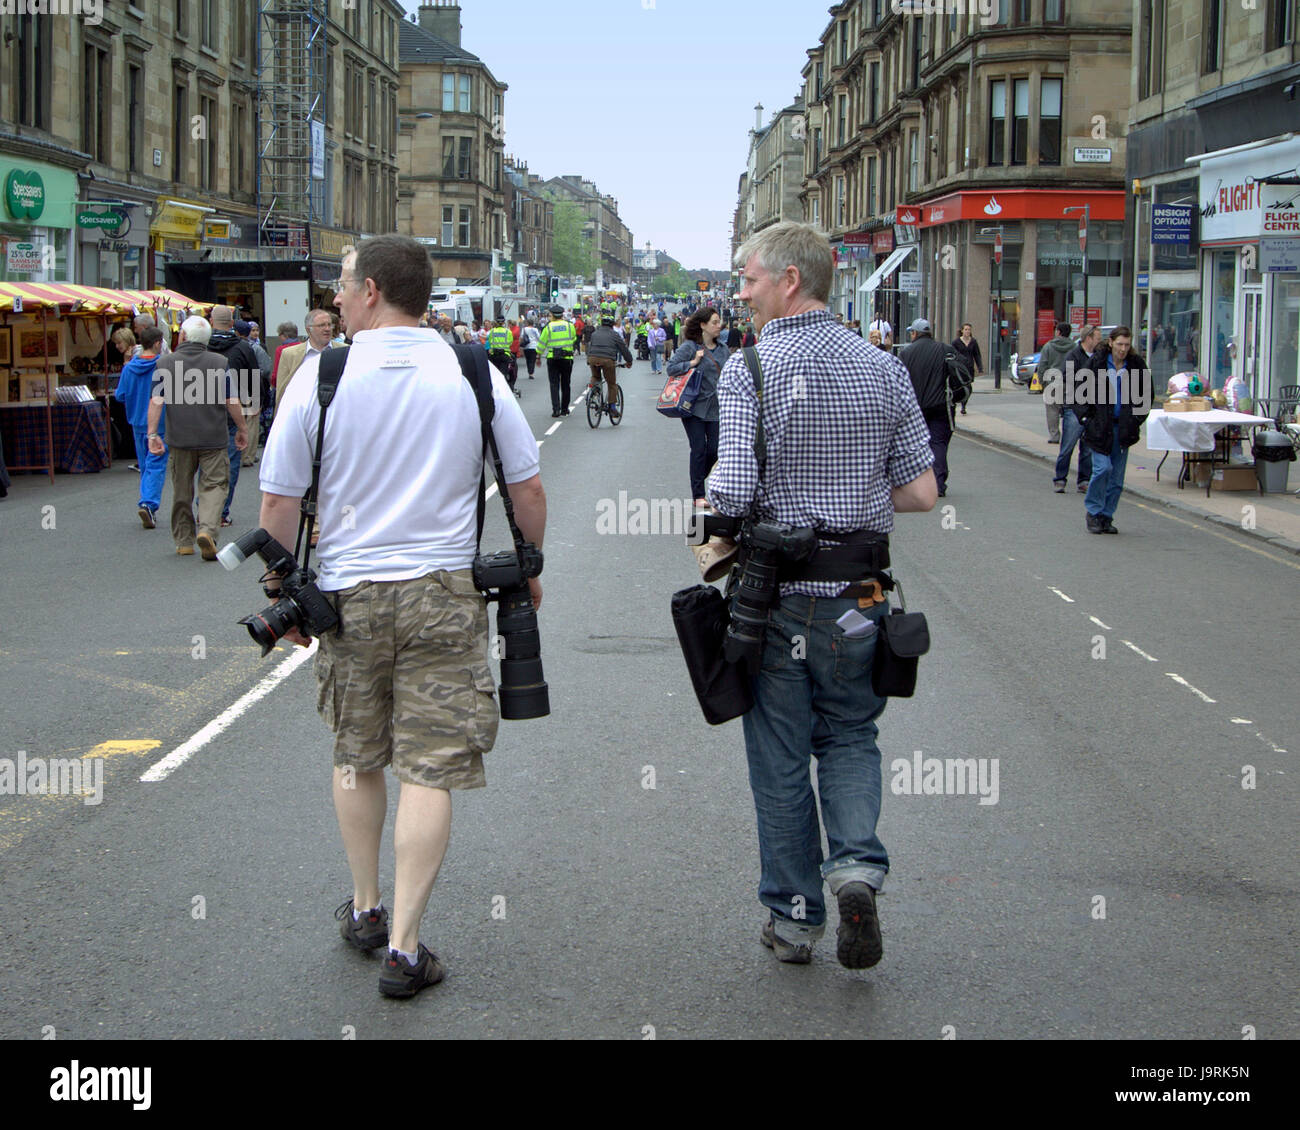 West End Festival scenes and people, Glasgow professional photographers equipment Stock Photo